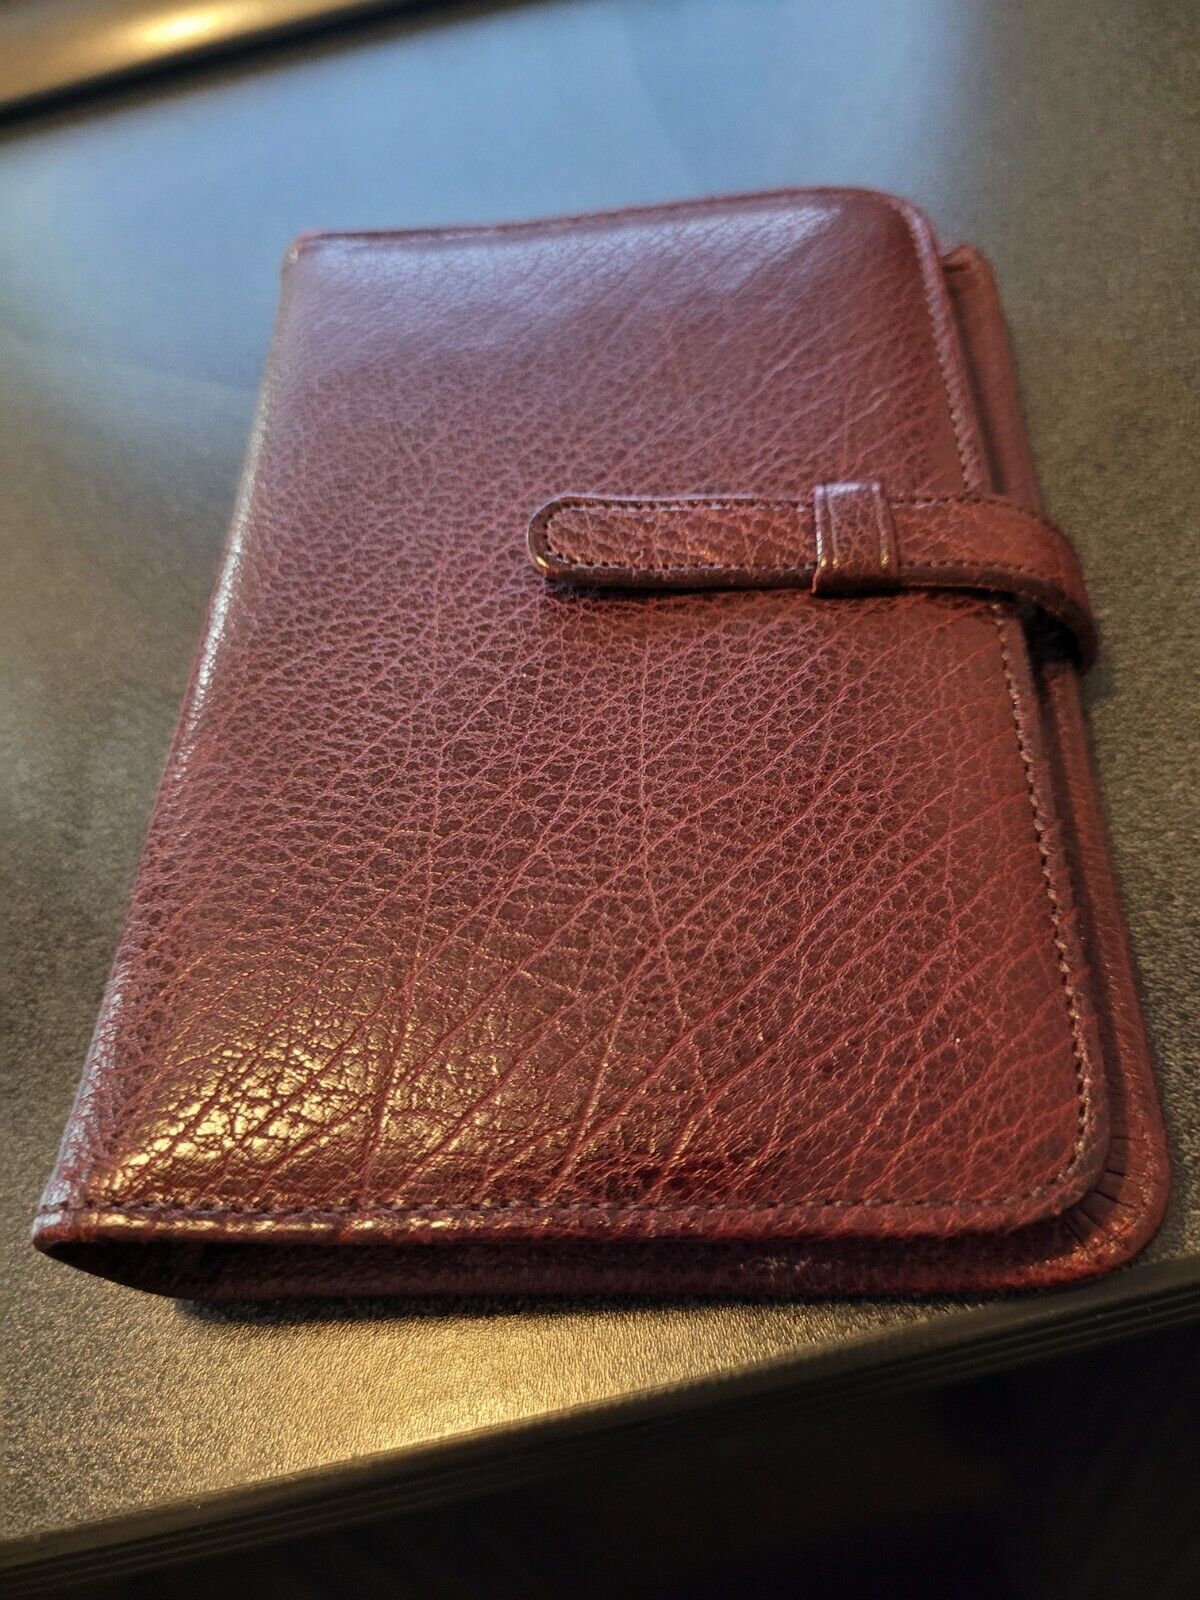 Coach Planner Burgundy Textured Leather Vintage Used